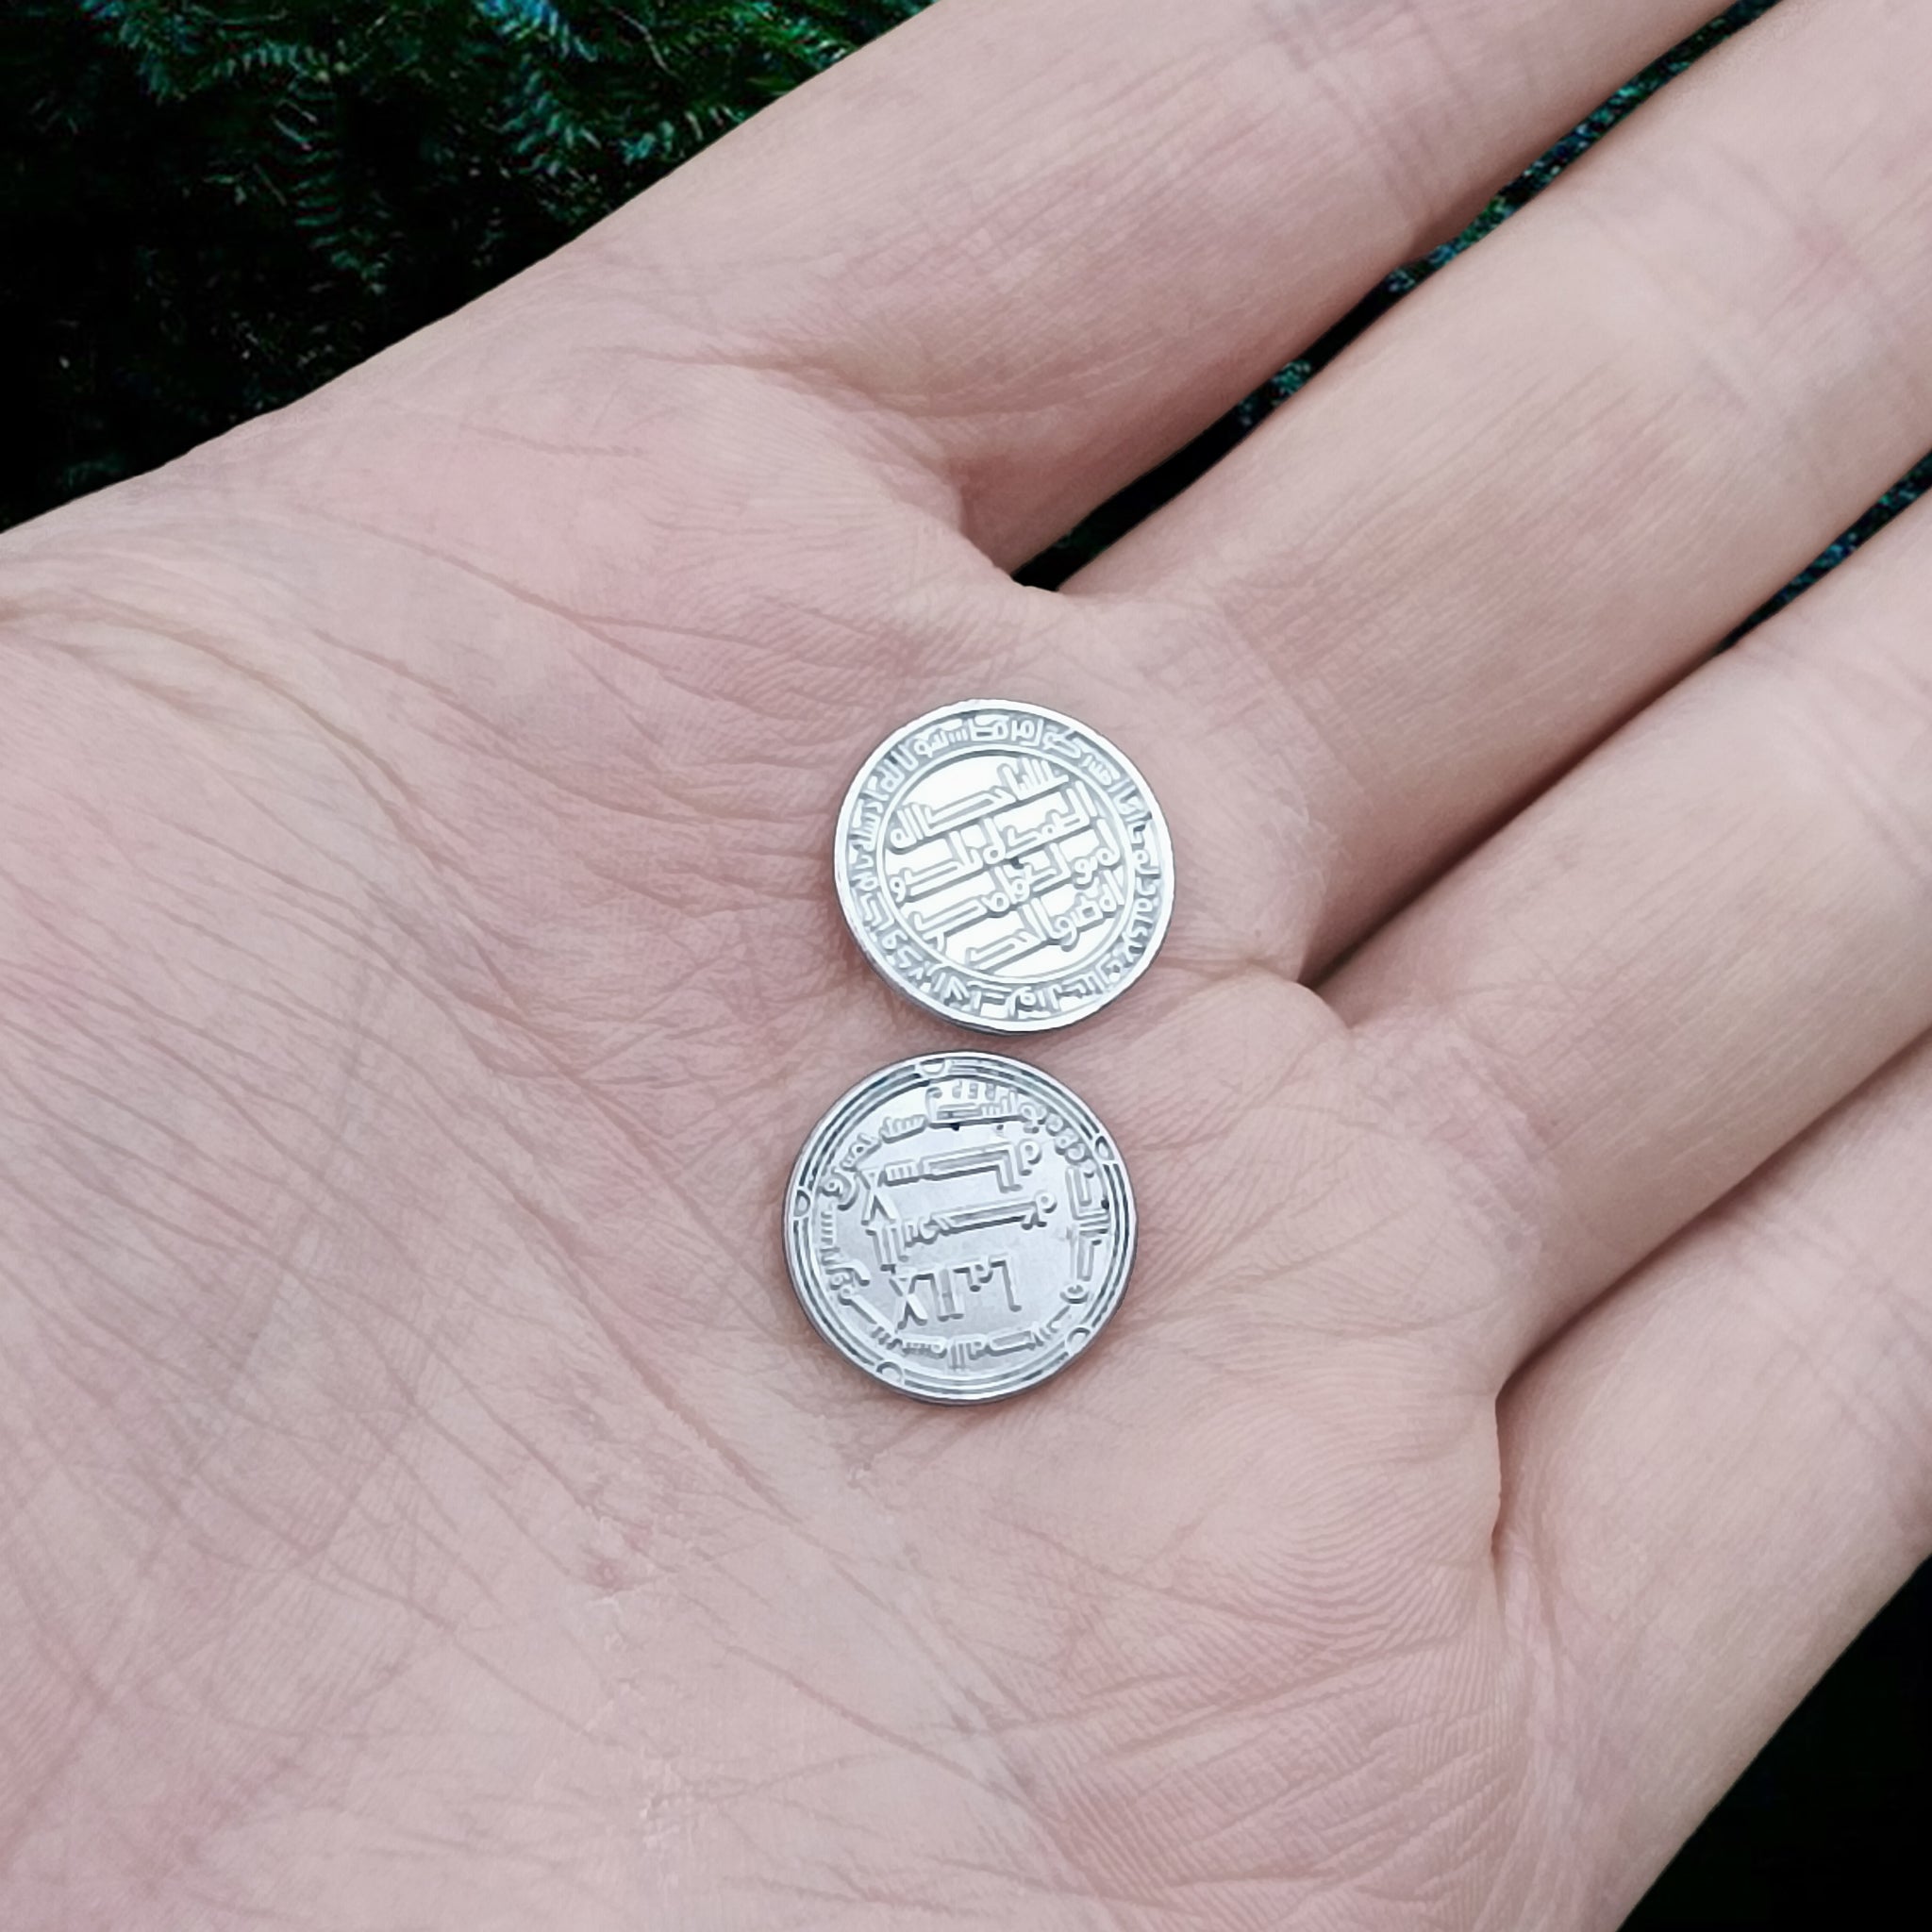 Replica Coins x 2 in hand, from the Isle of Skye - 10th Century Scotland, UK